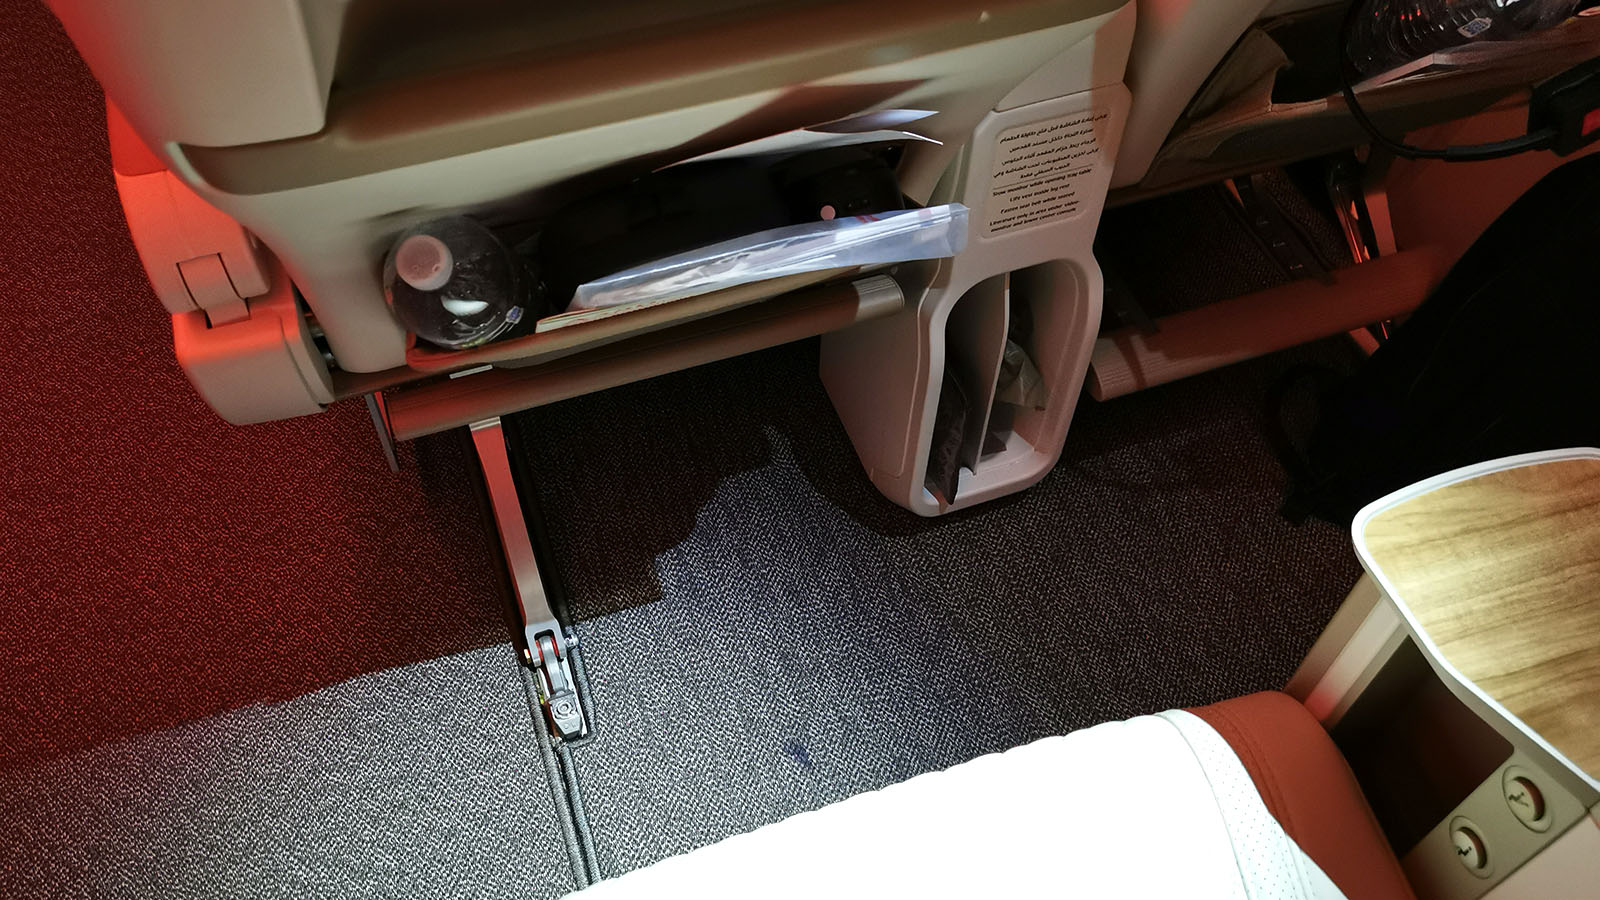 Space between rows in Emirates Airbus A380 Premium Economy